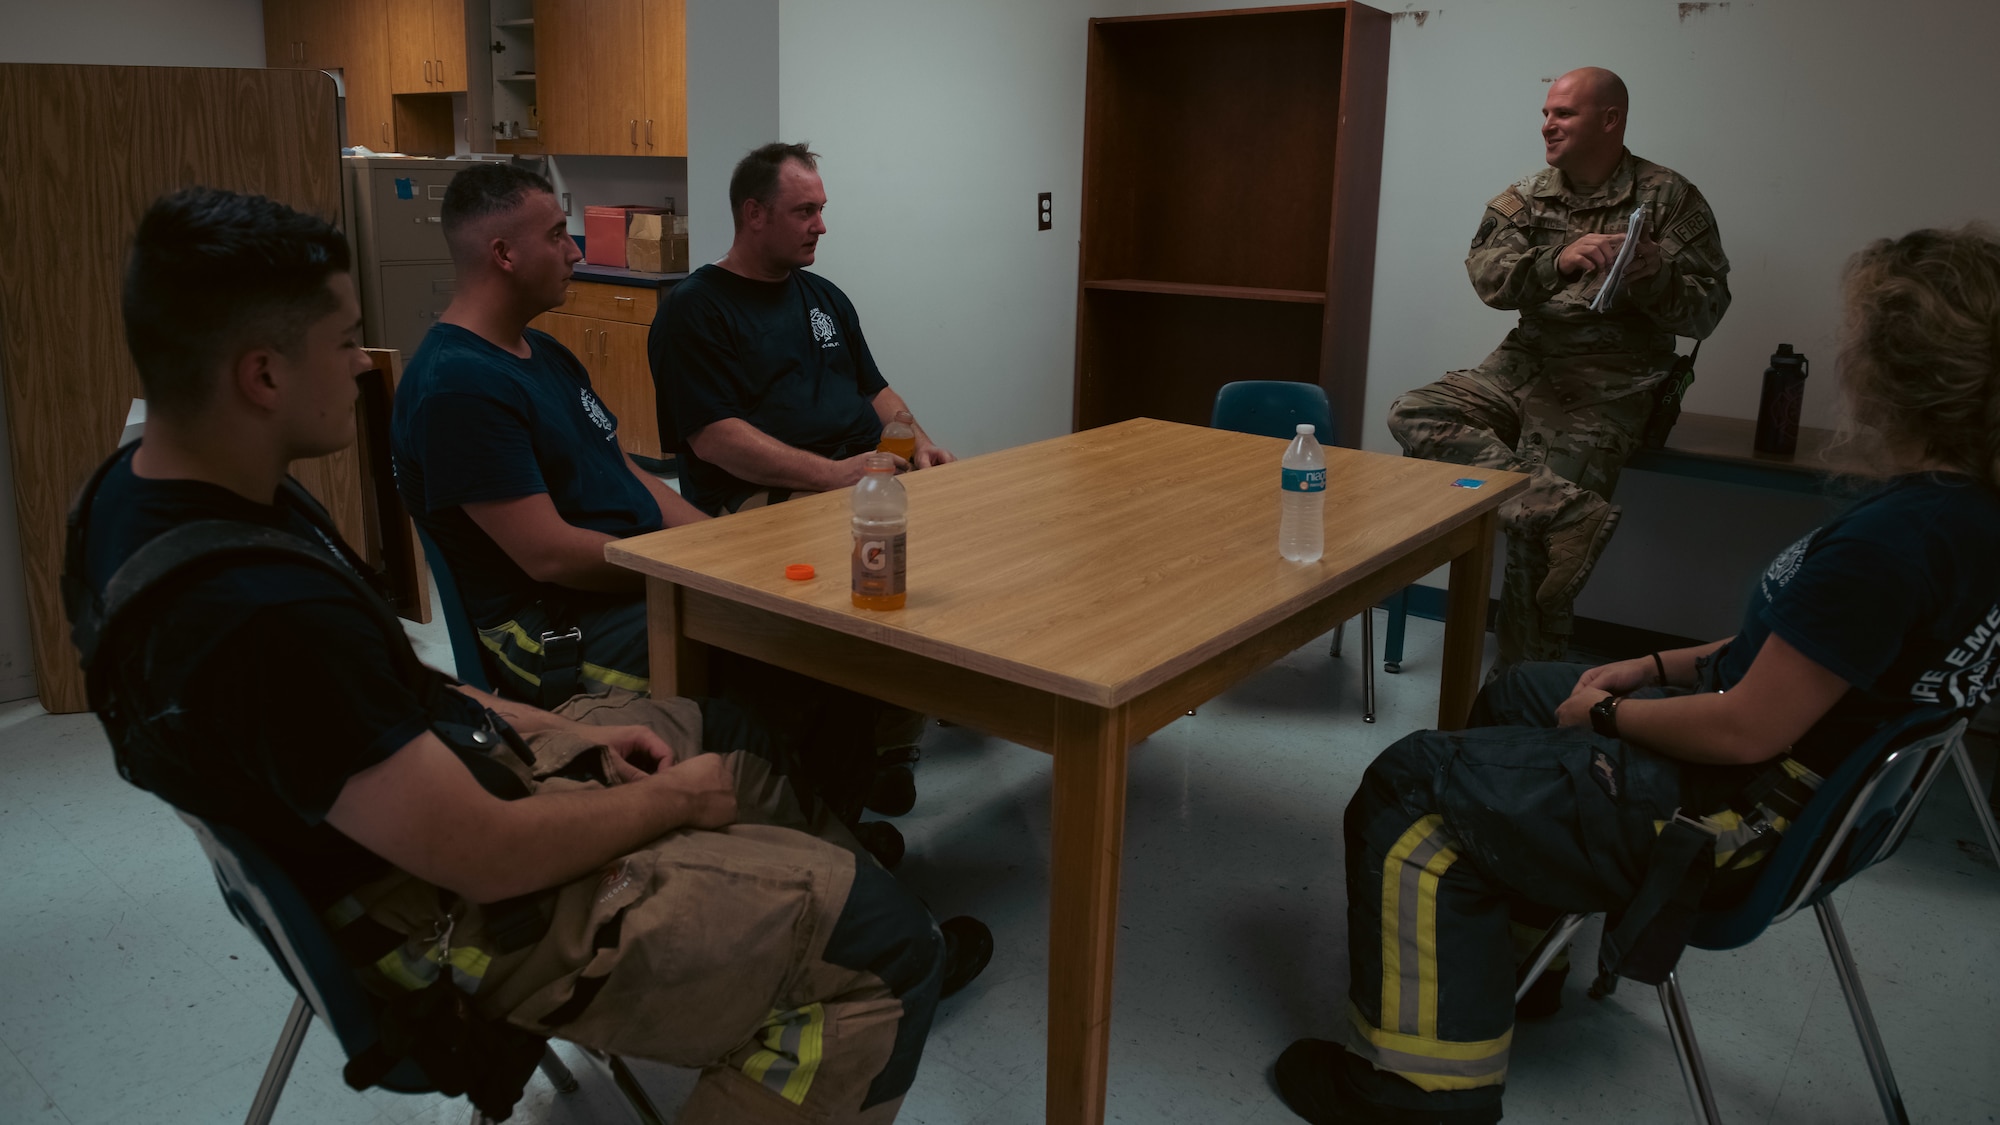 Firefighters talk in a group discussion.